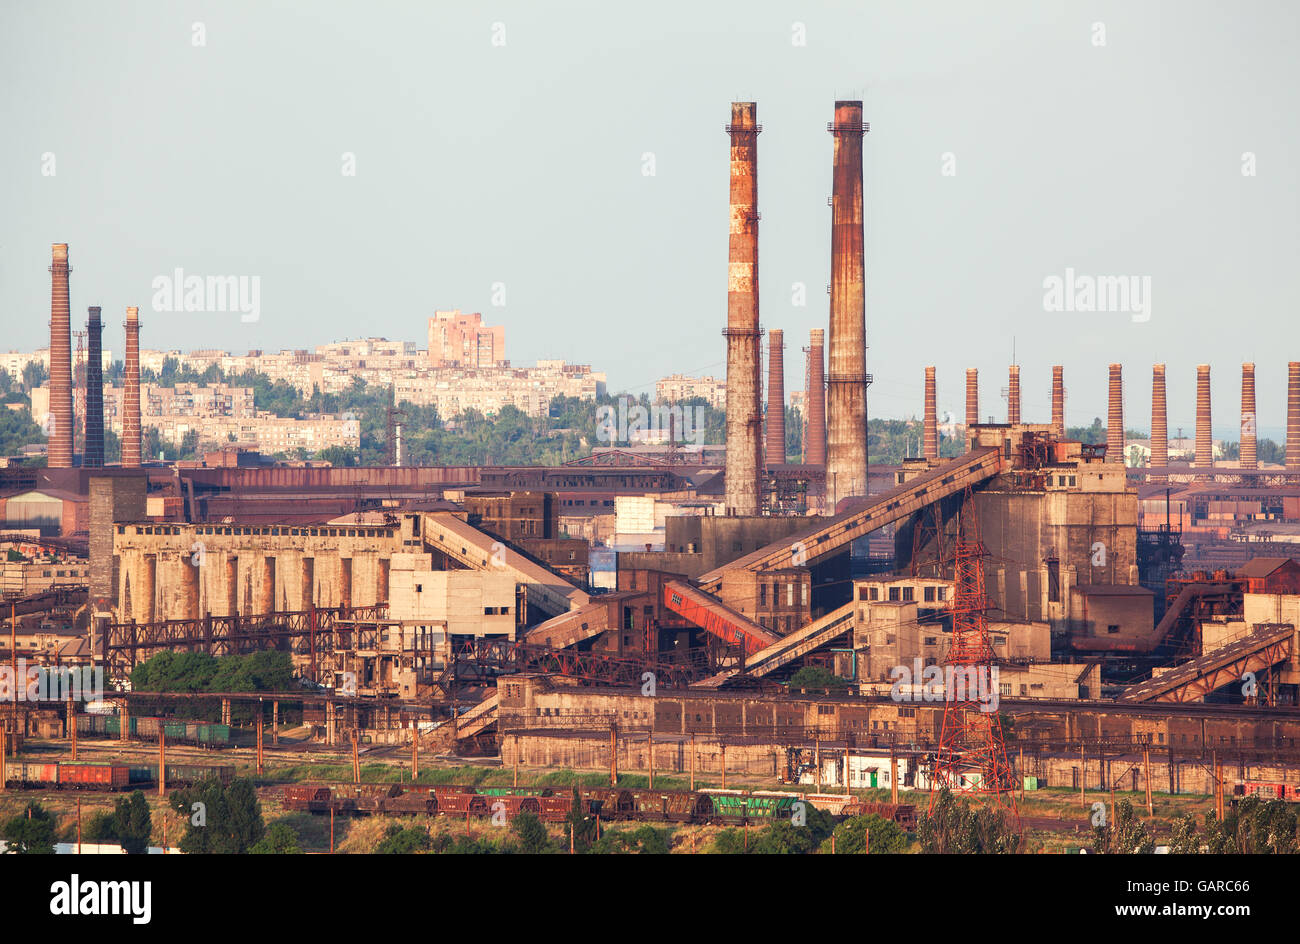 Steel factory with smokestacks at sunset. metallurgical plant. steelworks, iron works. Heavy industry in Europe. Air pollution f Stock Photo